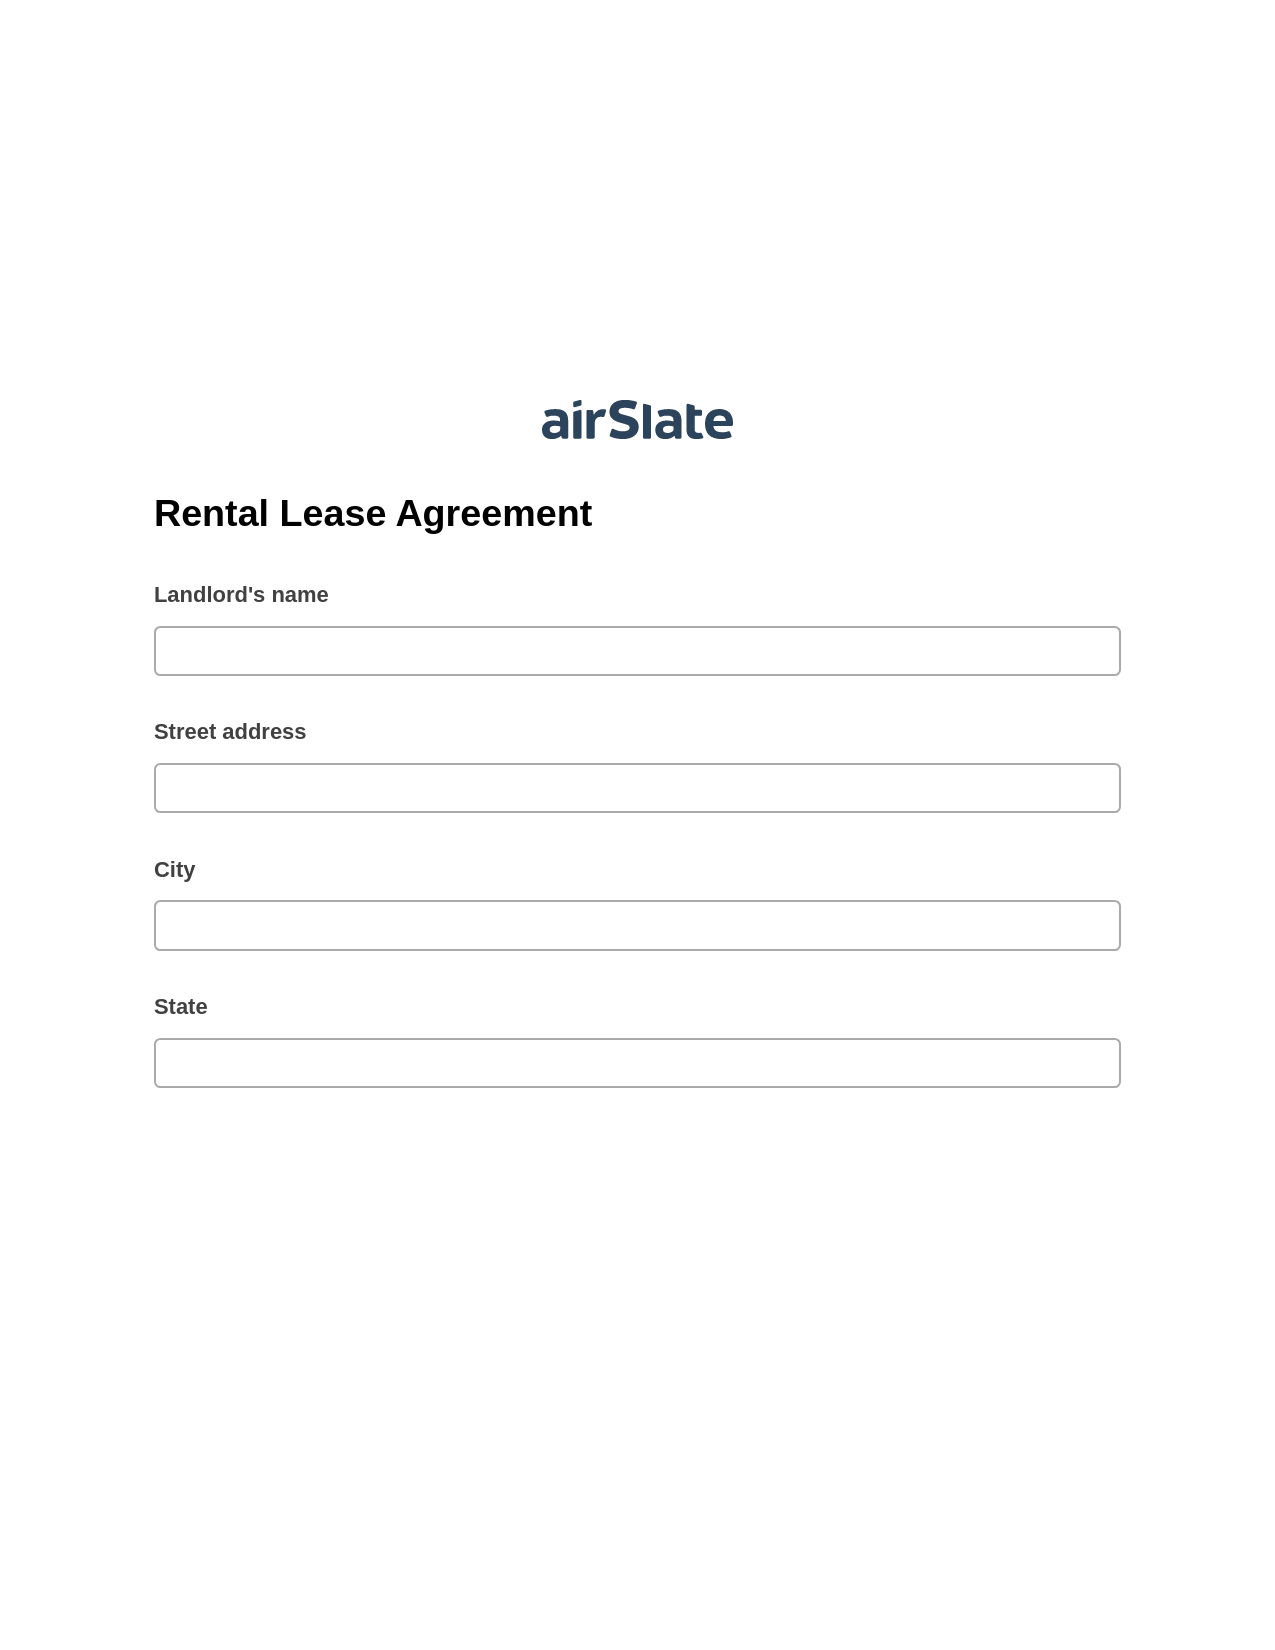 Rental Lease Agreement Pre-fill from another Slate Bot, Google Cloud Print Bot, Export to Smartsheet